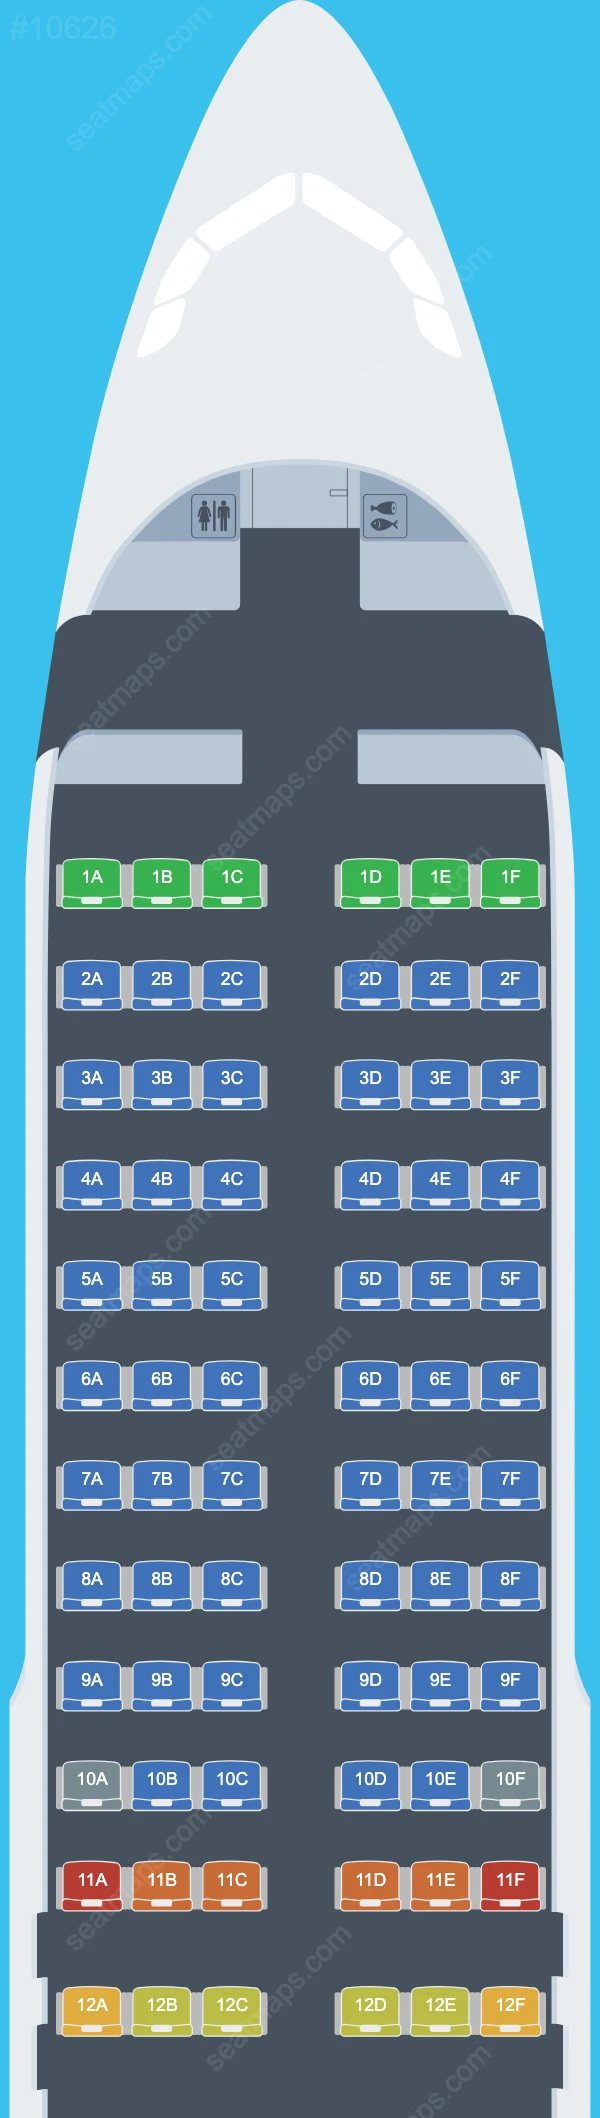 HiSky Airbus A320 Seat Maps A320-200